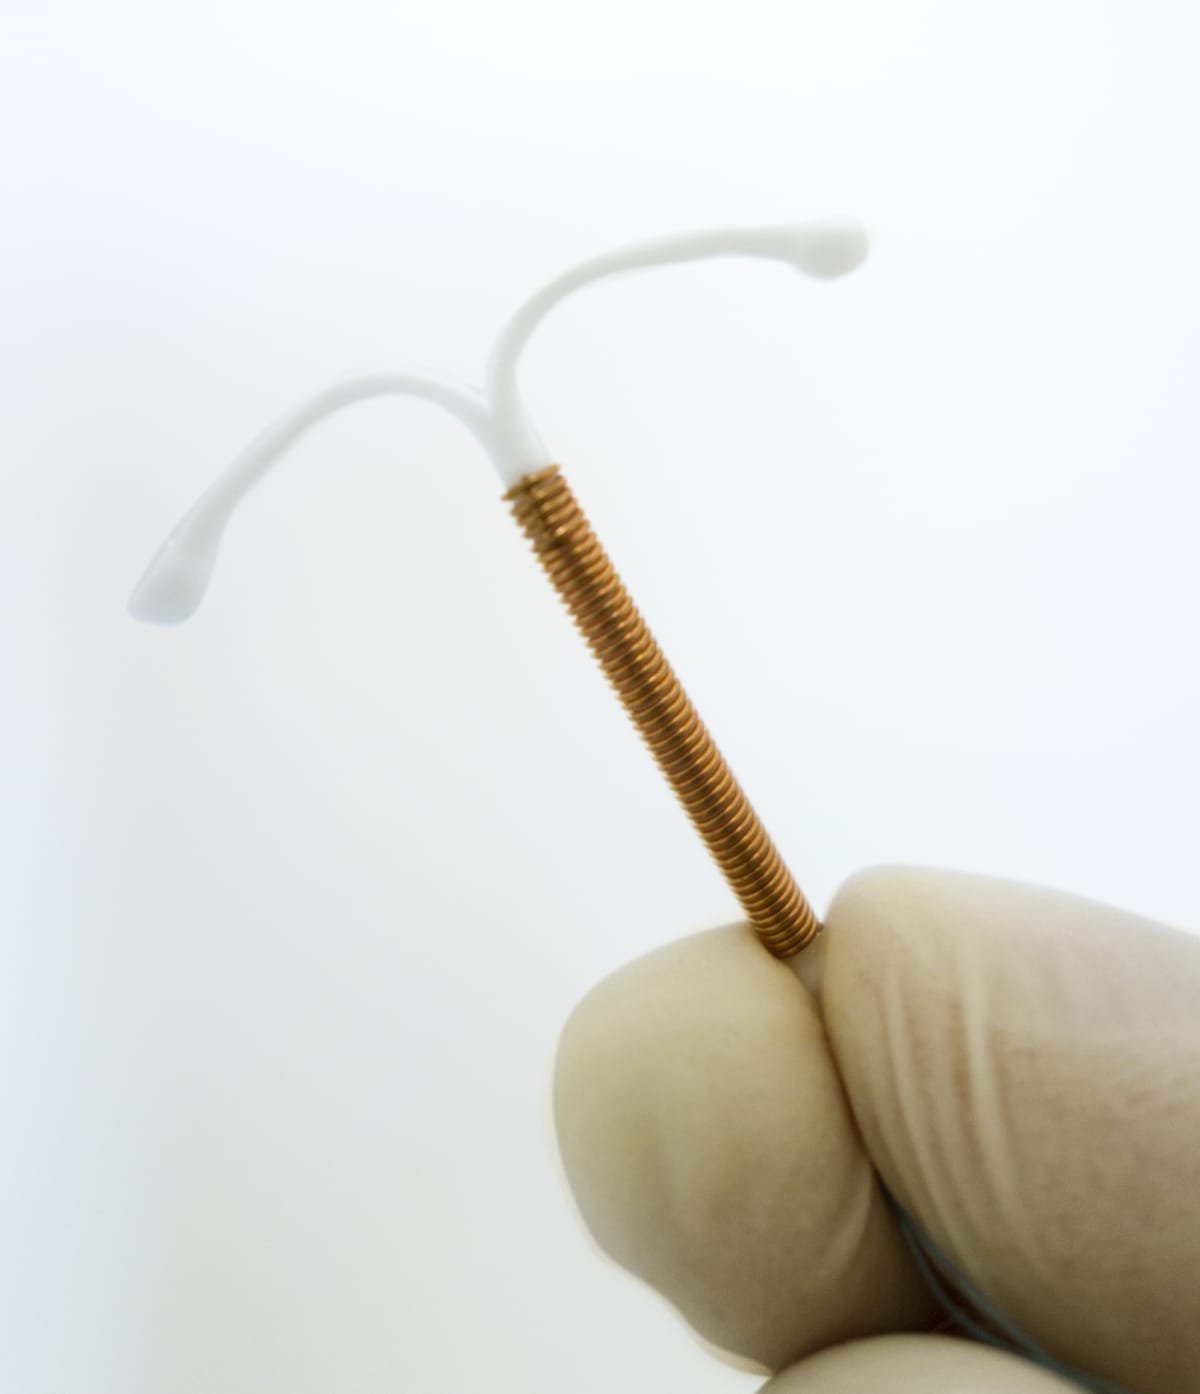 An IUD is held up by gloved fingers